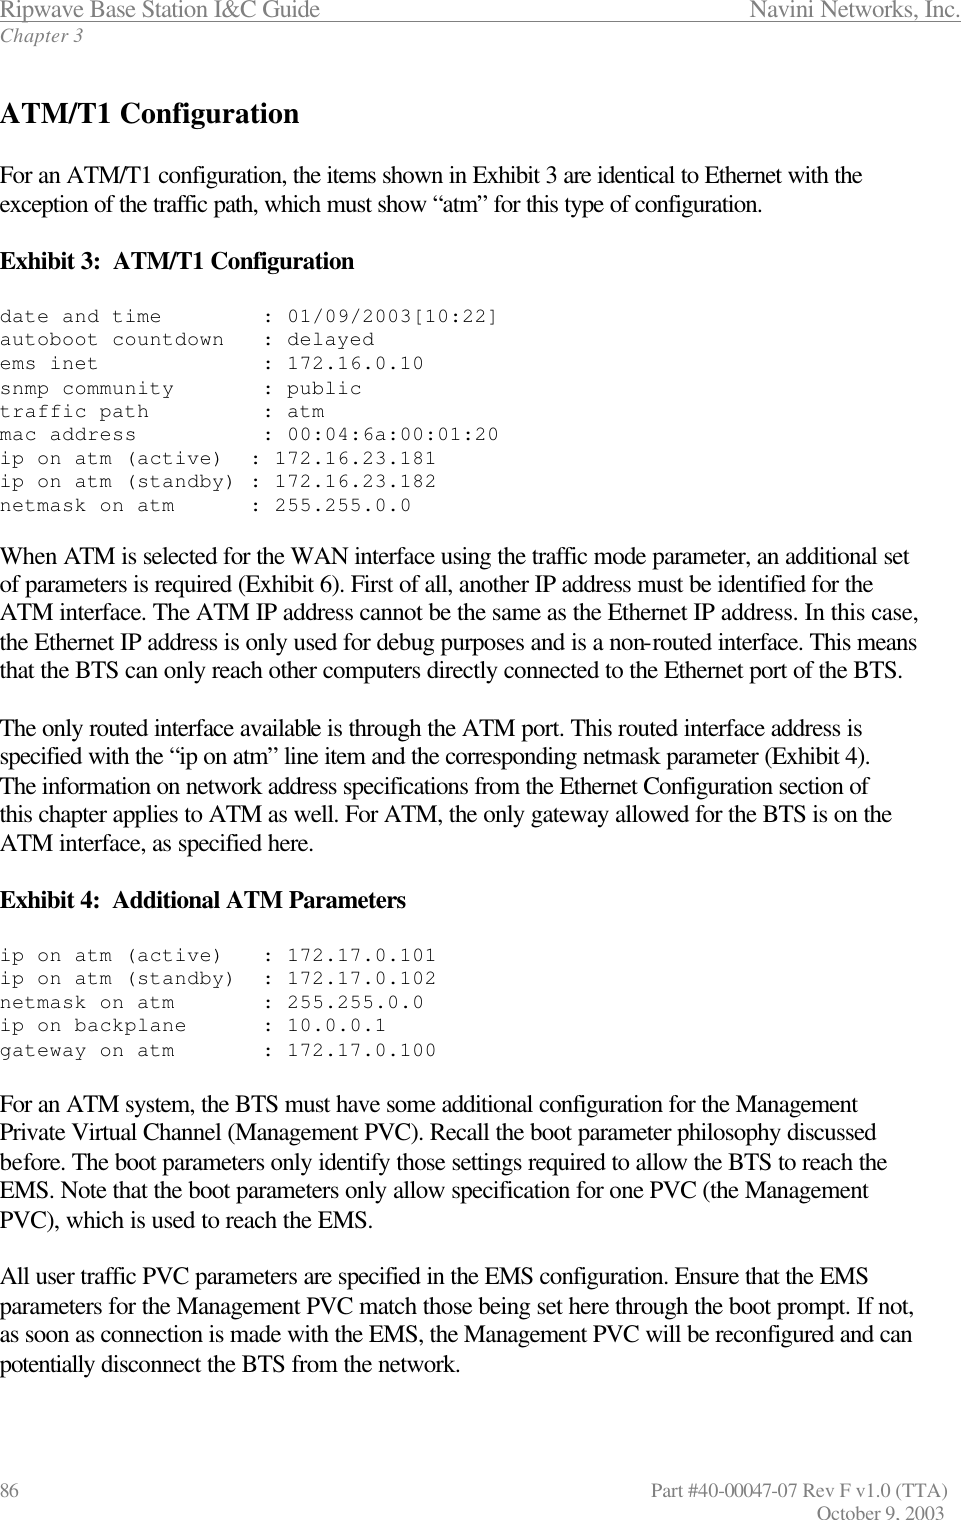 Ripwave Base Station I&amp;C Guide                 Navini Networks, Inc. Chapter 3 86                   Part #40-00047-07 Rev F v1.0 (TTA)         October 9, 2003  ATM/T1 Configuration  For an ATM/T1 configuration, the items shown in Exhibit 3 are identical to Ethernet with the exception of the traffic path, which must show “atm” for this type of configuration.  Exhibit 3:  ATM/T1 Configuration  date and time        : 01/09/2003[10:22] autoboot countdown   : delayed ems inet             : 172.16.0.10 snmp community       : public traffic path         : atm mac address          : 00:04:6a:00:01:20 ip on atm (active)  : 172.16.23.181 ip on atm (standby) : 172.16.23.182 netmask on atm      : 255.255.0.0  When ATM is selected for the WAN interface using the traffic mode parameter, an additional set of parameters is required (Exhibit 6). First of all, another IP address must be identified for the ATM interface. The ATM IP address cannot be the same as the Ethernet IP address. In this case, the Ethernet IP address is only used for debug purposes and is a non-routed interface. This means that the BTS can only reach other computers directly connected to the Ethernet port of the BTS.  The only routed interface available is through the ATM port. This routed interface address is specified with the “ip on atm” line item and the corresponding netmask parameter (Exhibit 4). The information on network address specifications from the Ethernet Configuration section of this chapter applies to ATM as well. For ATM, the only gateway allowed for the BTS is on the ATM interface, as specified here.   Exhibit 4:  Additional ATM Parameters  ip on atm (active)   : 172.17.0.101 ip on atm (standby)  : 172.17.0.102 netmask on atm       : 255.255.0.0 ip on backplane      : 10.0.0.1 gateway on atm       : 172.17.0.100  For an ATM system, the BTS must have some additional configuration for the Management Private Virtual Channel (Management PVC). Recall the boot parameter philosophy discussed before. The boot parameters only identify those settings required to allow the BTS to reach the EMS. Note that the boot parameters only allow specification for one PVC (the Management PVC), which is used to reach the EMS.   All user traffic PVC parameters are specified in the EMS configuration. Ensure that the EMS parameters for the Management PVC match those being set here through the boot prompt. If not, as soon as connection is made with the EMS, the Management PVC will be reconfigured and can potentially disconnect the BTS from the network.  